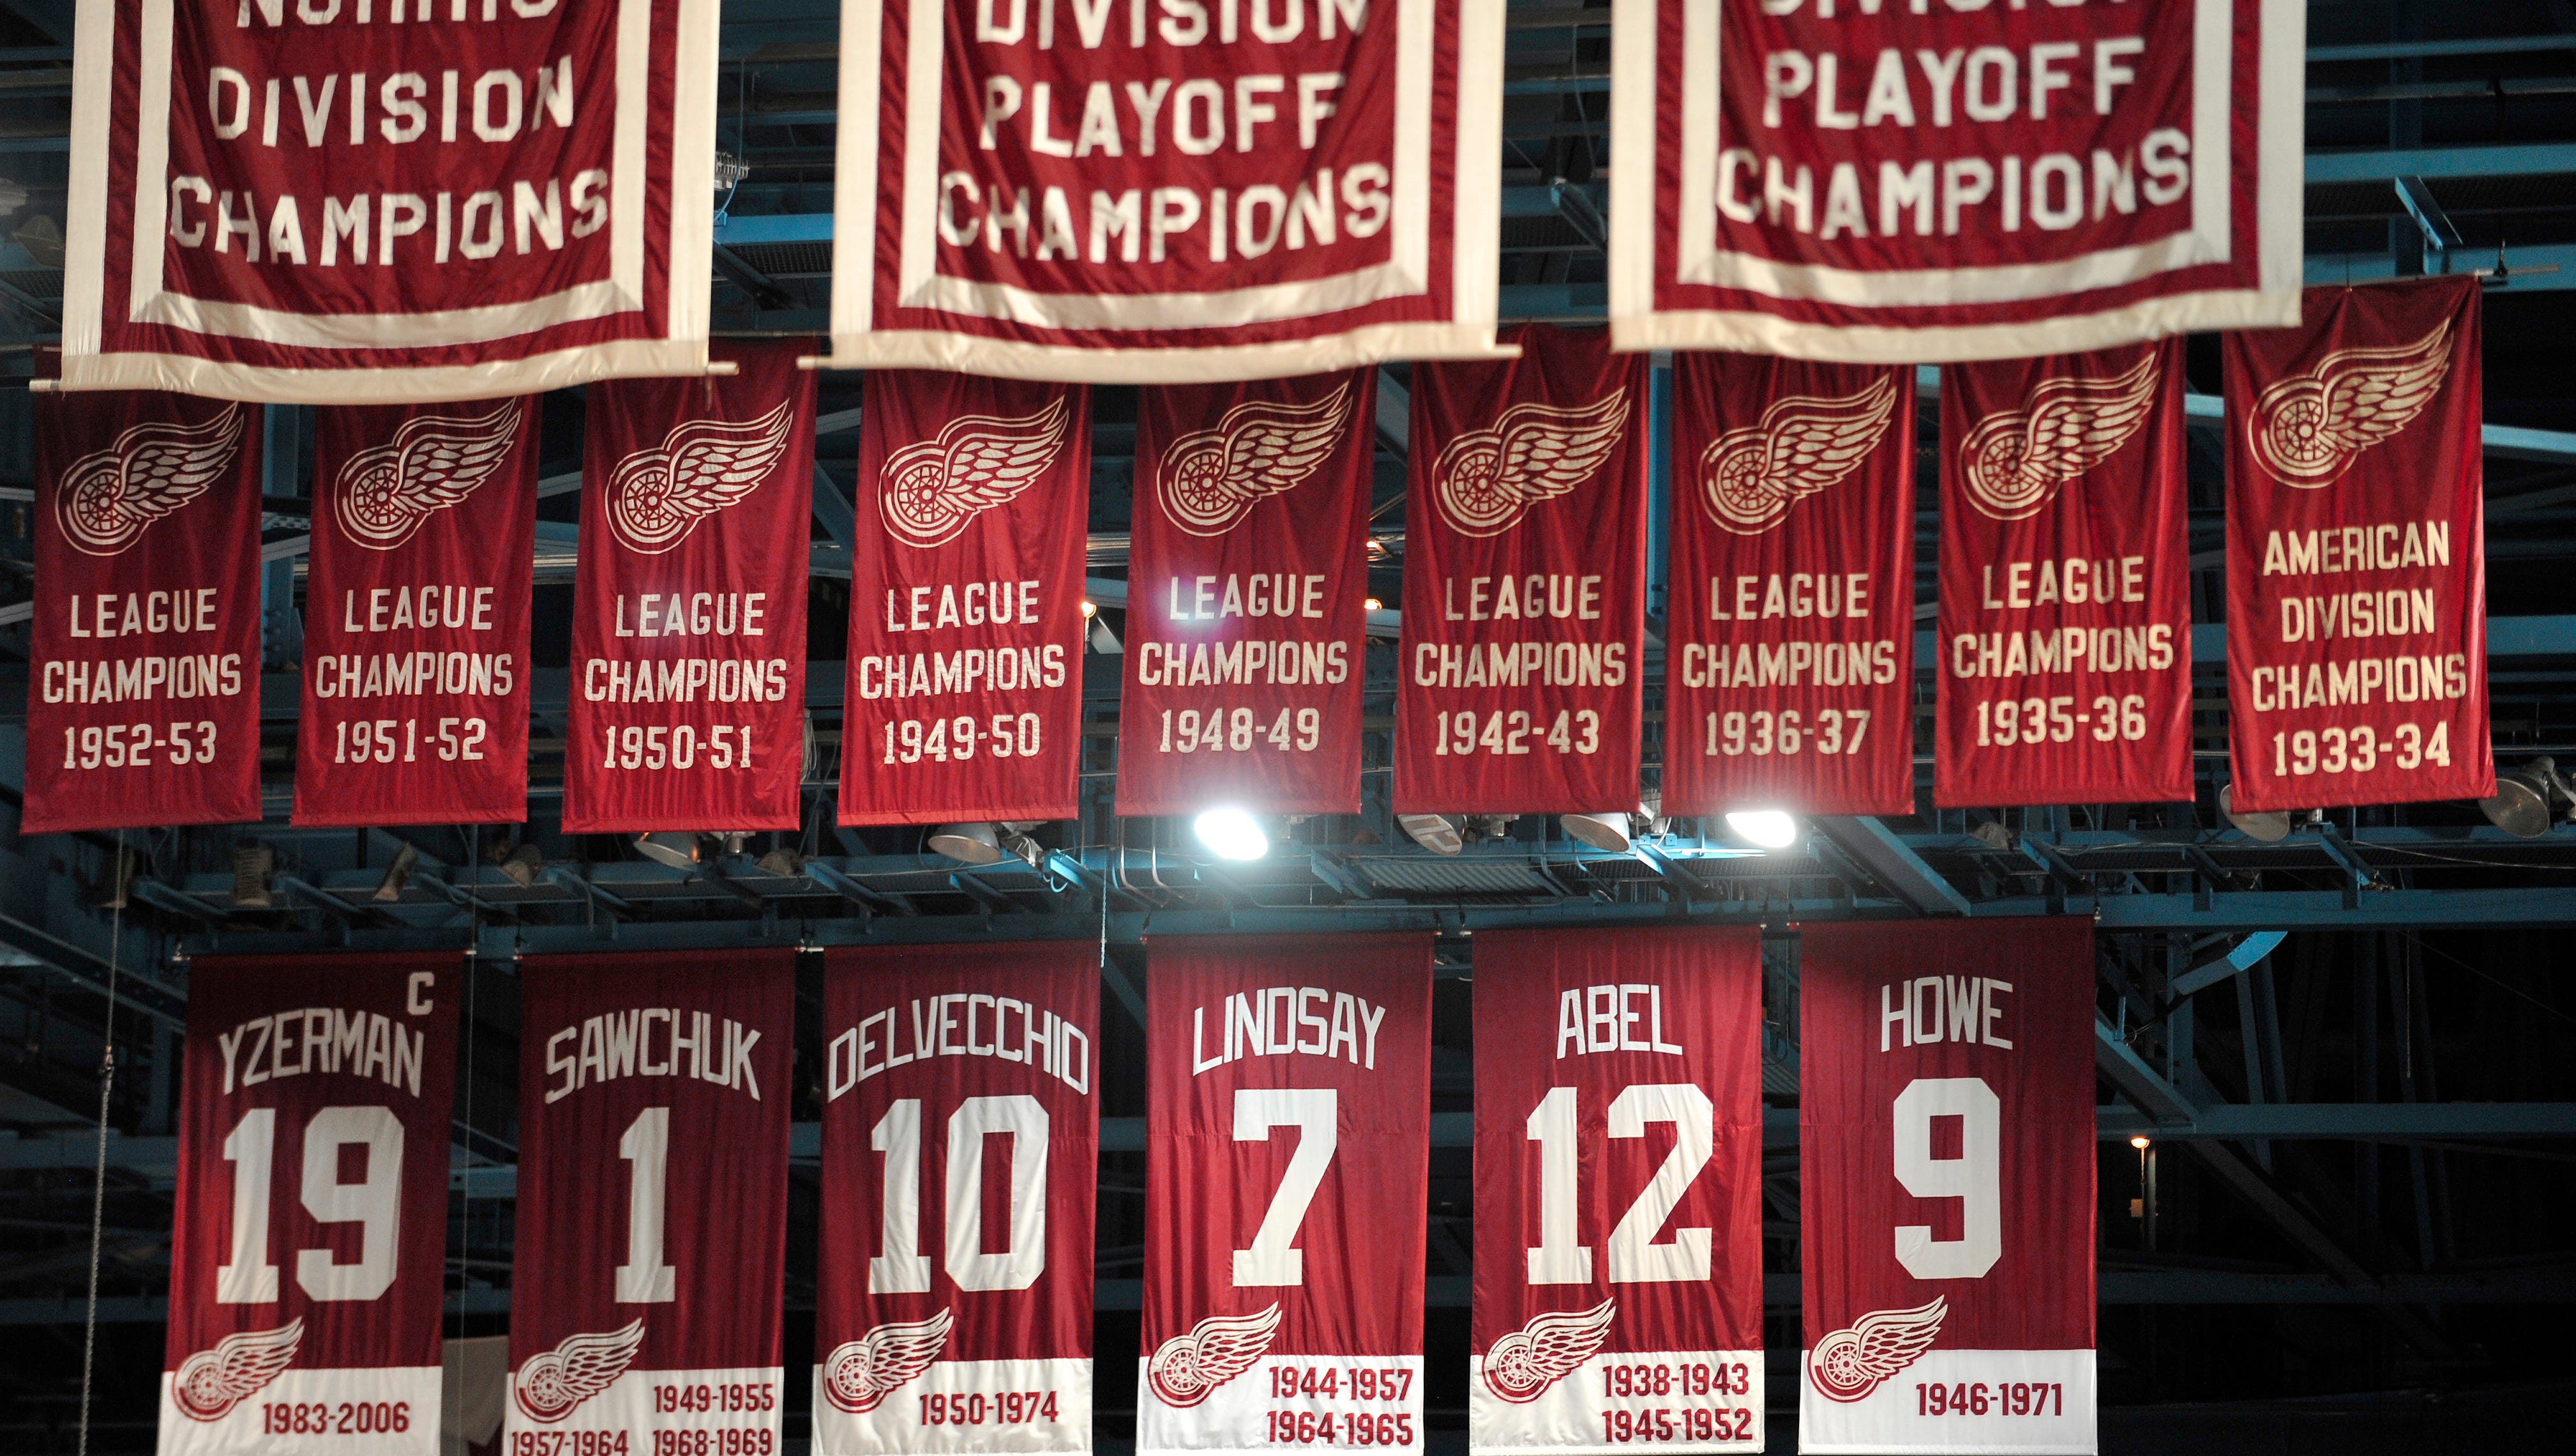 The evidence of Red Wings franchise success hangs from the rafters along with the retired numbers of Red Wings greats Steve Yzerman, Terry Sawchuck, Alex Delvecchio, Ted Lindsay, Sid Abel and Gordie Howe  on  May 2, 2013.